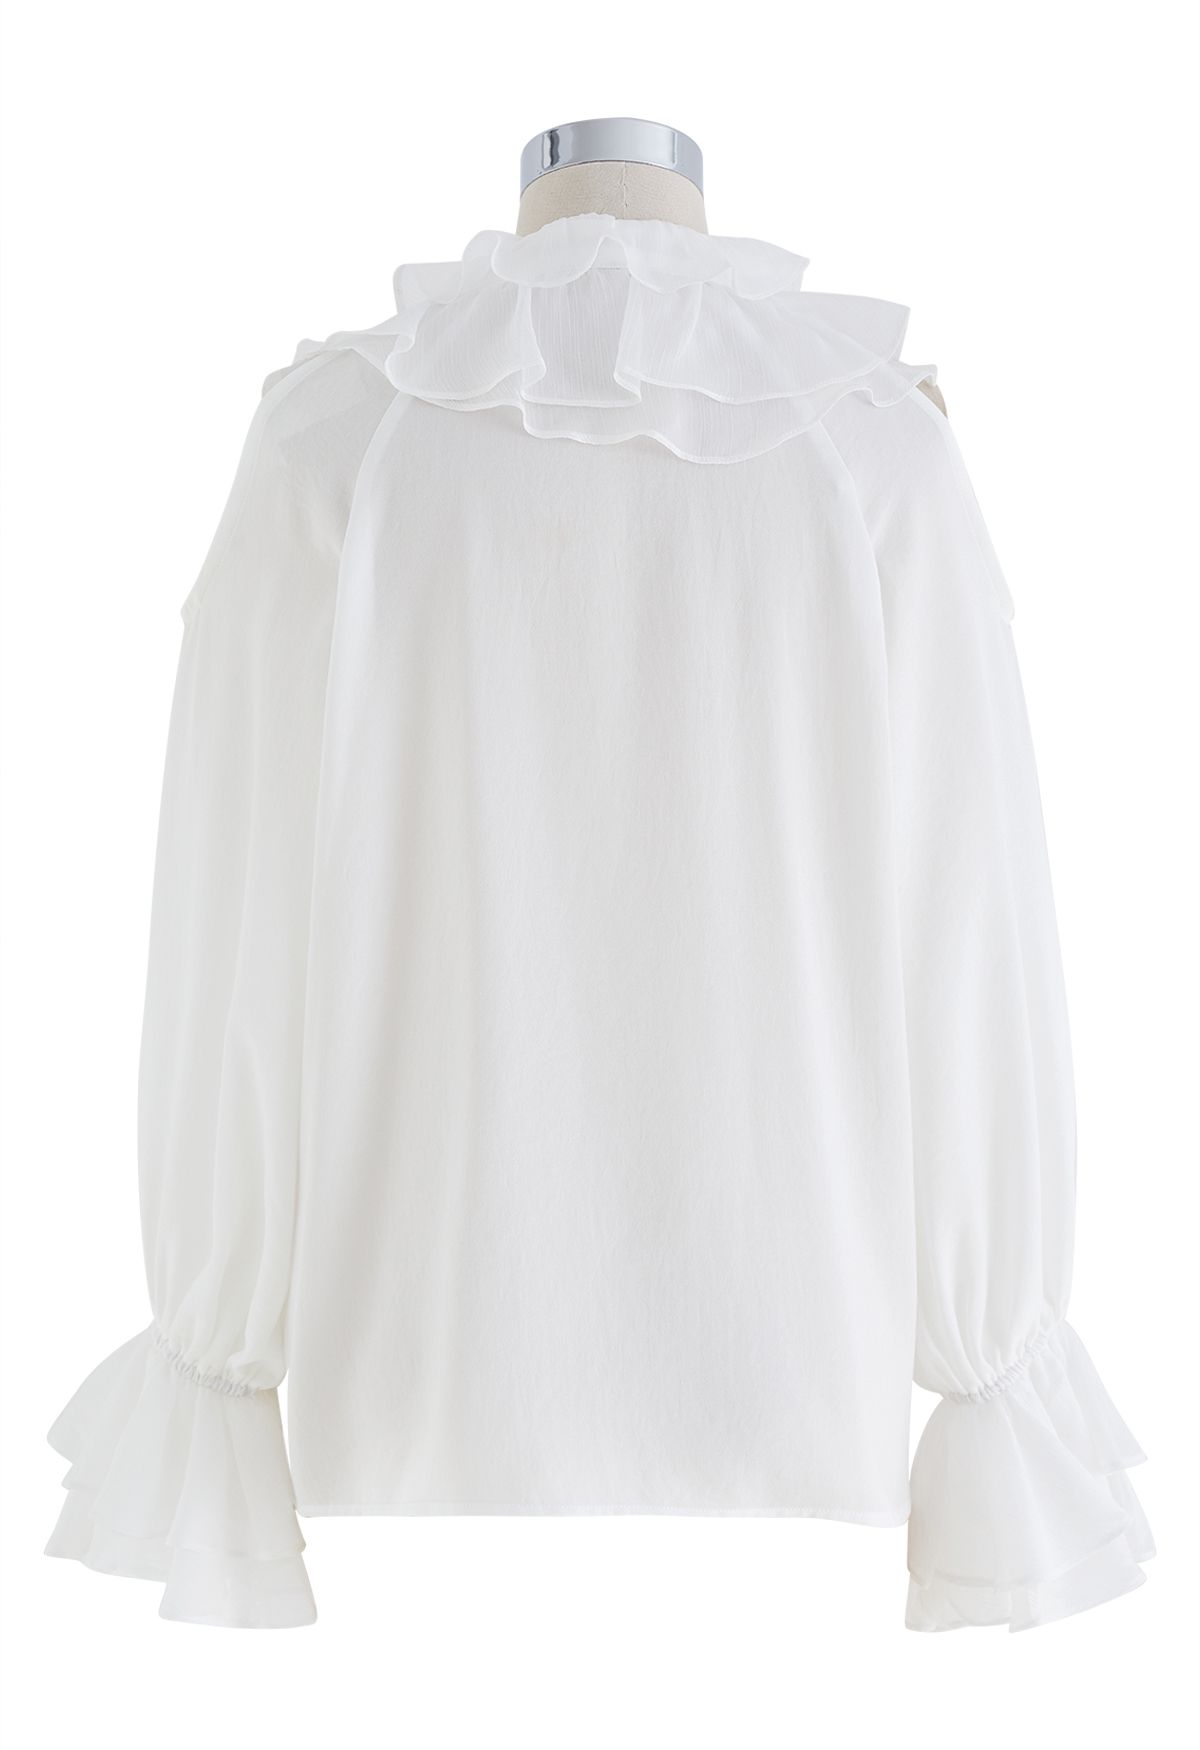 Tiered Ruffle Cold-Shoulder Chiffon Top in White